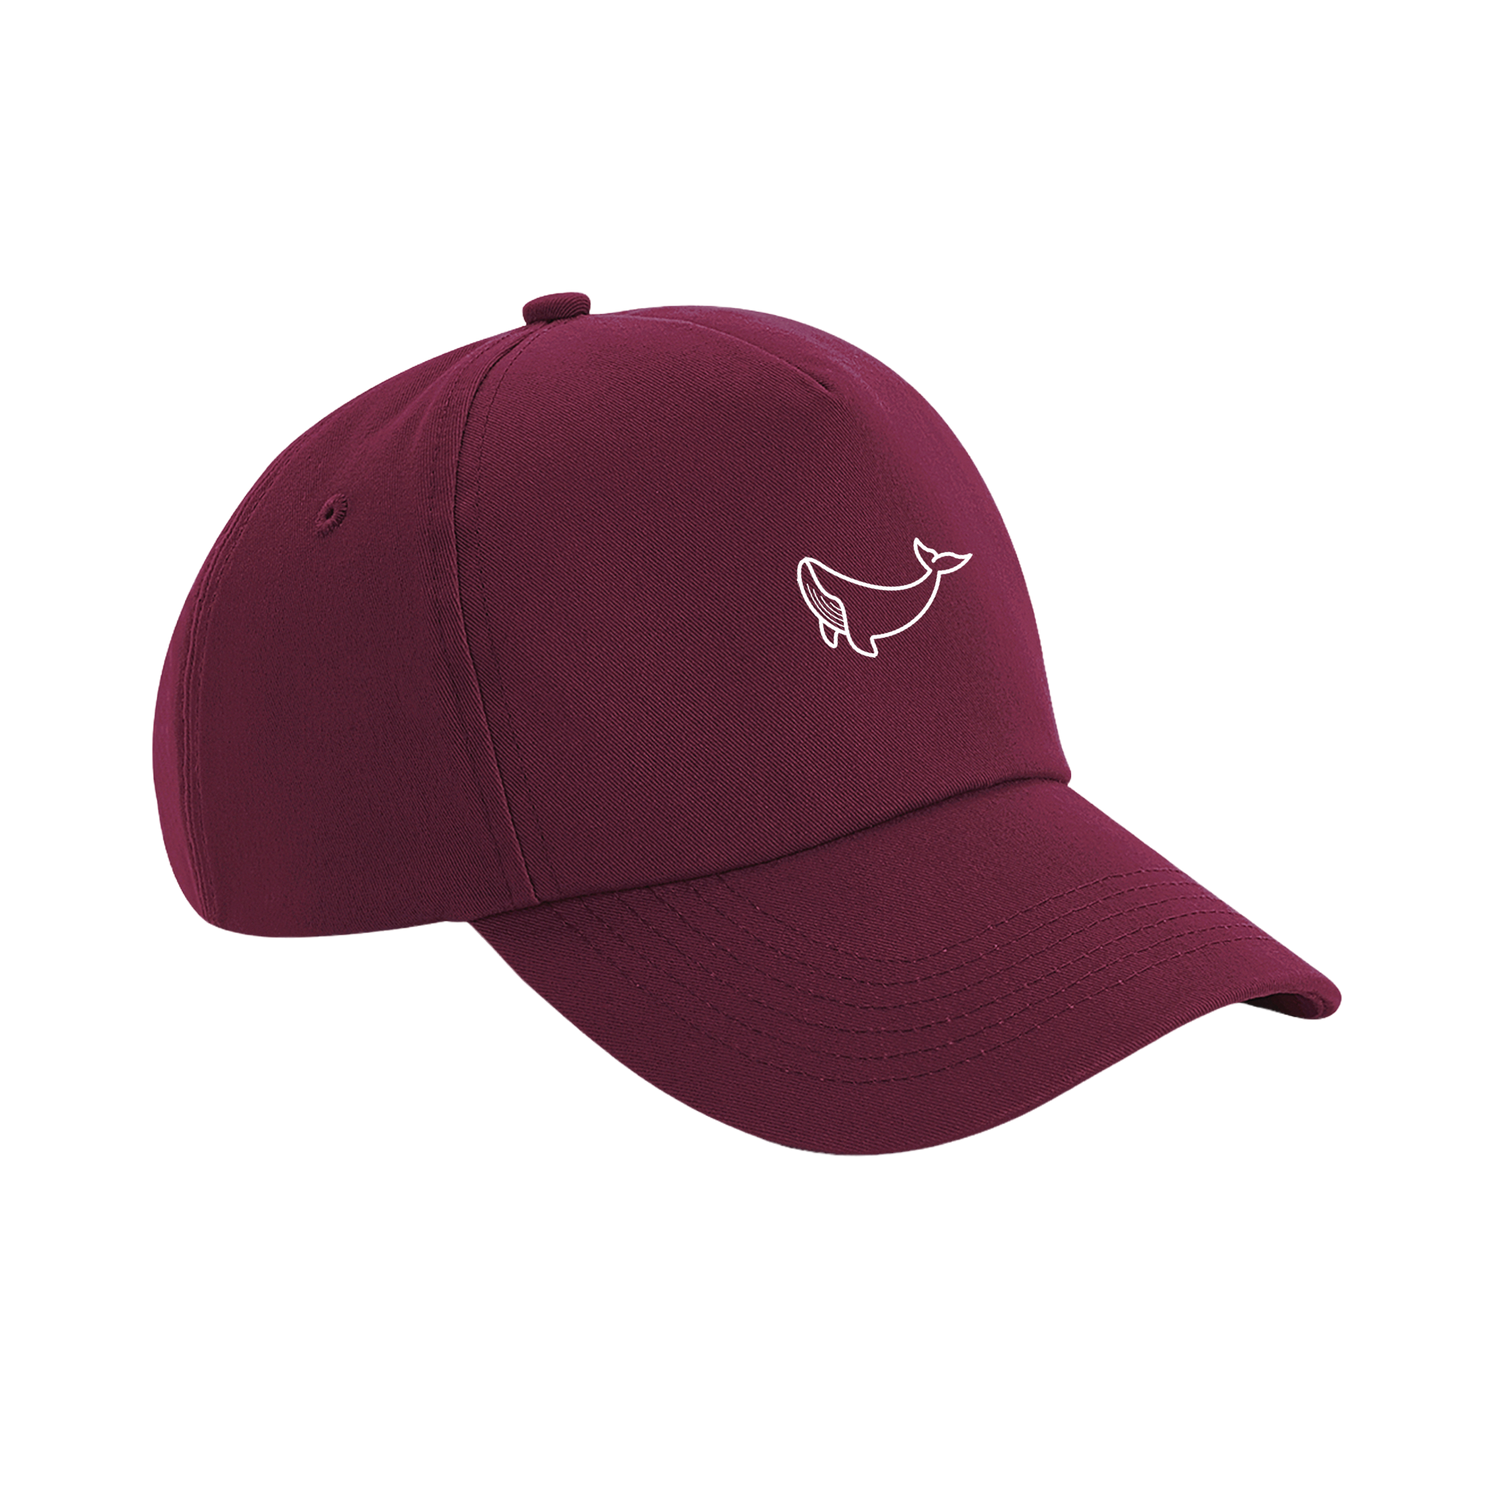 Whale embroidered Cap - Seaman&